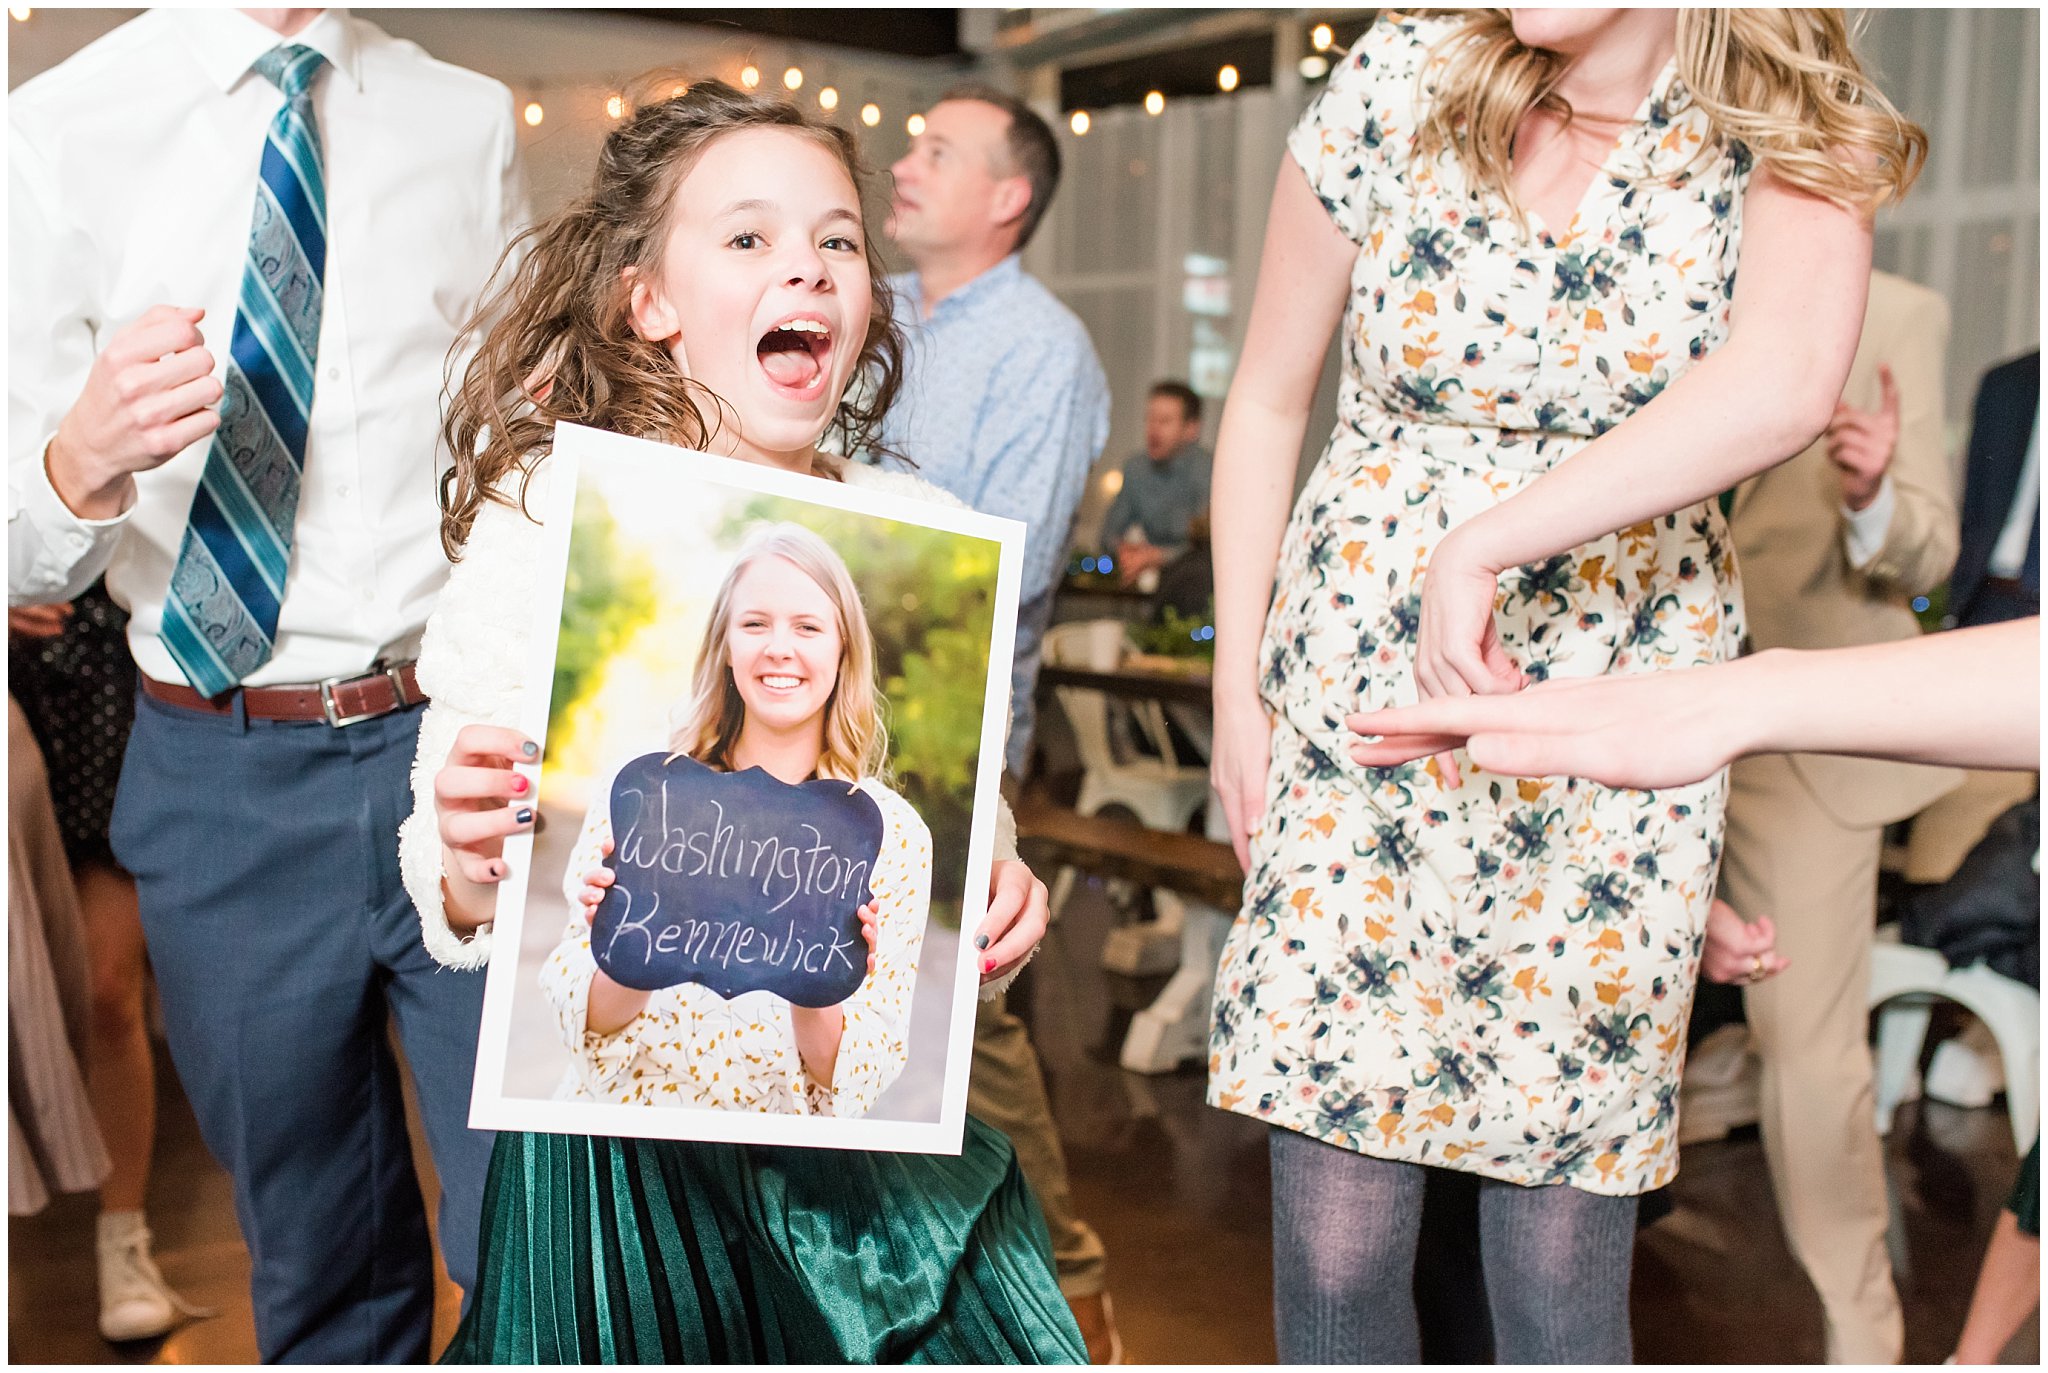 Party dancing with guests during reception at Sweet Magnolia Venues | Brown, Emerald Green, and white wedding | Ogden Temple and Sweet Magnolia Wedding | Jessie and Dallin Photography